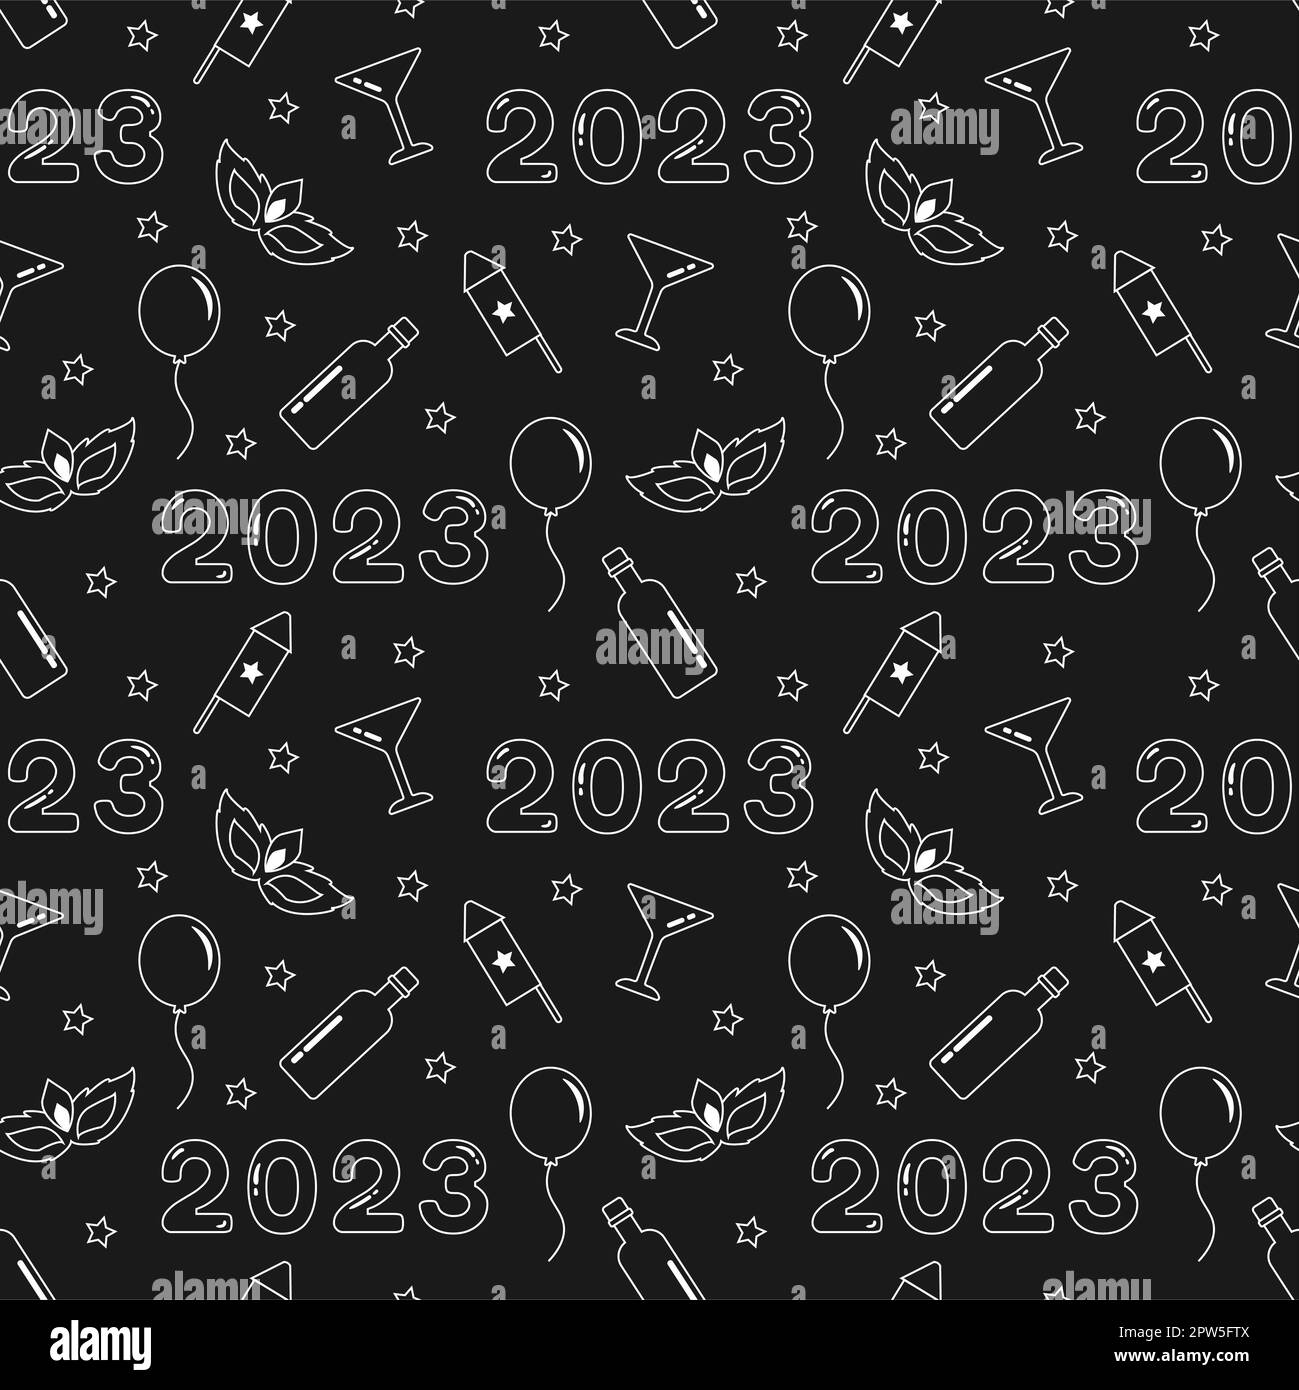 Happy New Year 2023 Seamless Pattern Design with Decoration in Template Hand Drawn Cartoon Flat Illustration Stock Photo